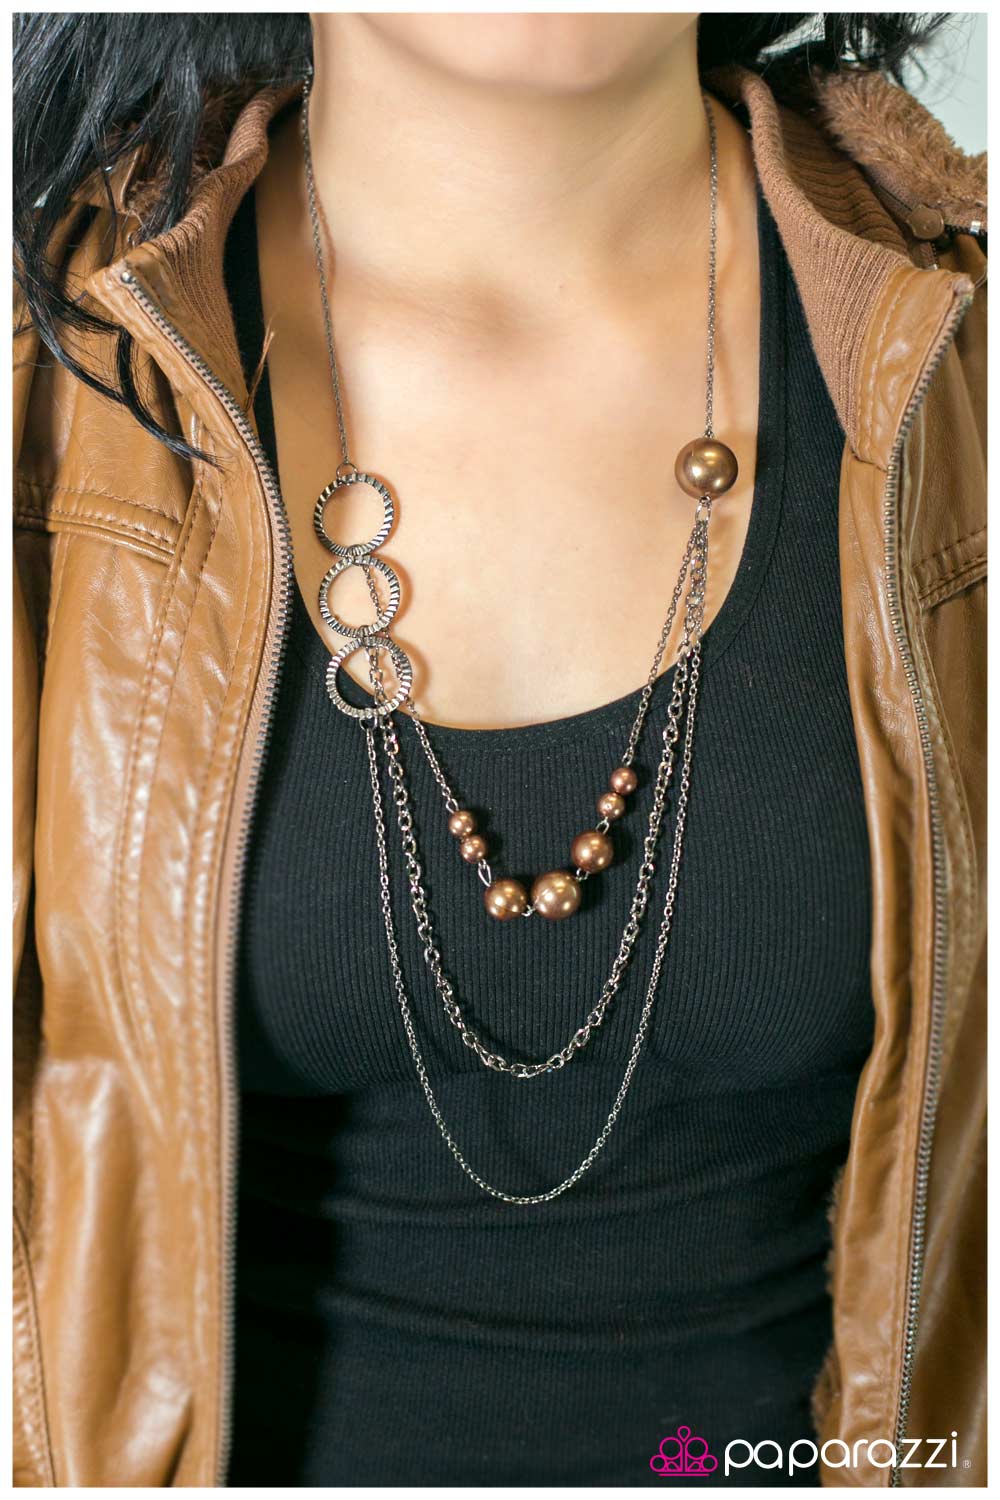 Your Crimping My Style - Paparazzi necklace